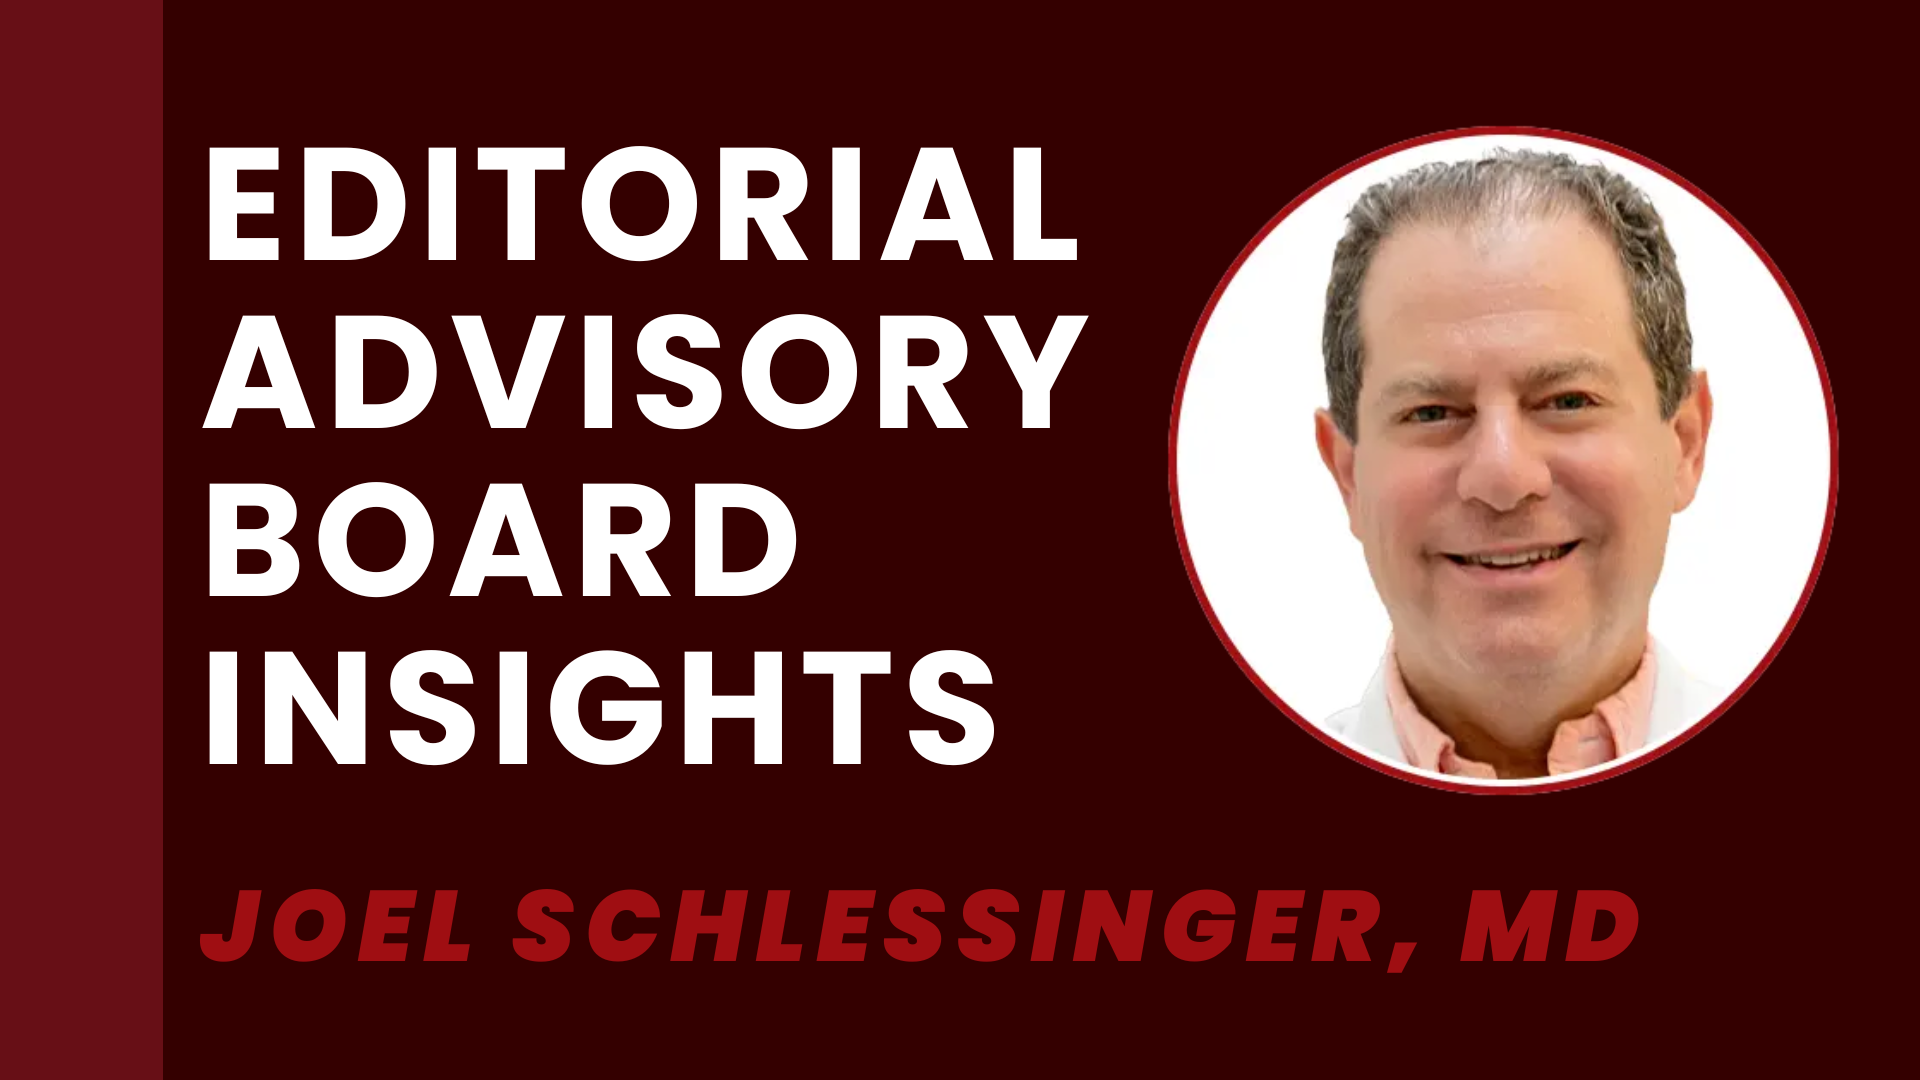 Editorial Advisory Board Insights for Eczema Awareness Month: Joel Schlessinger, MD